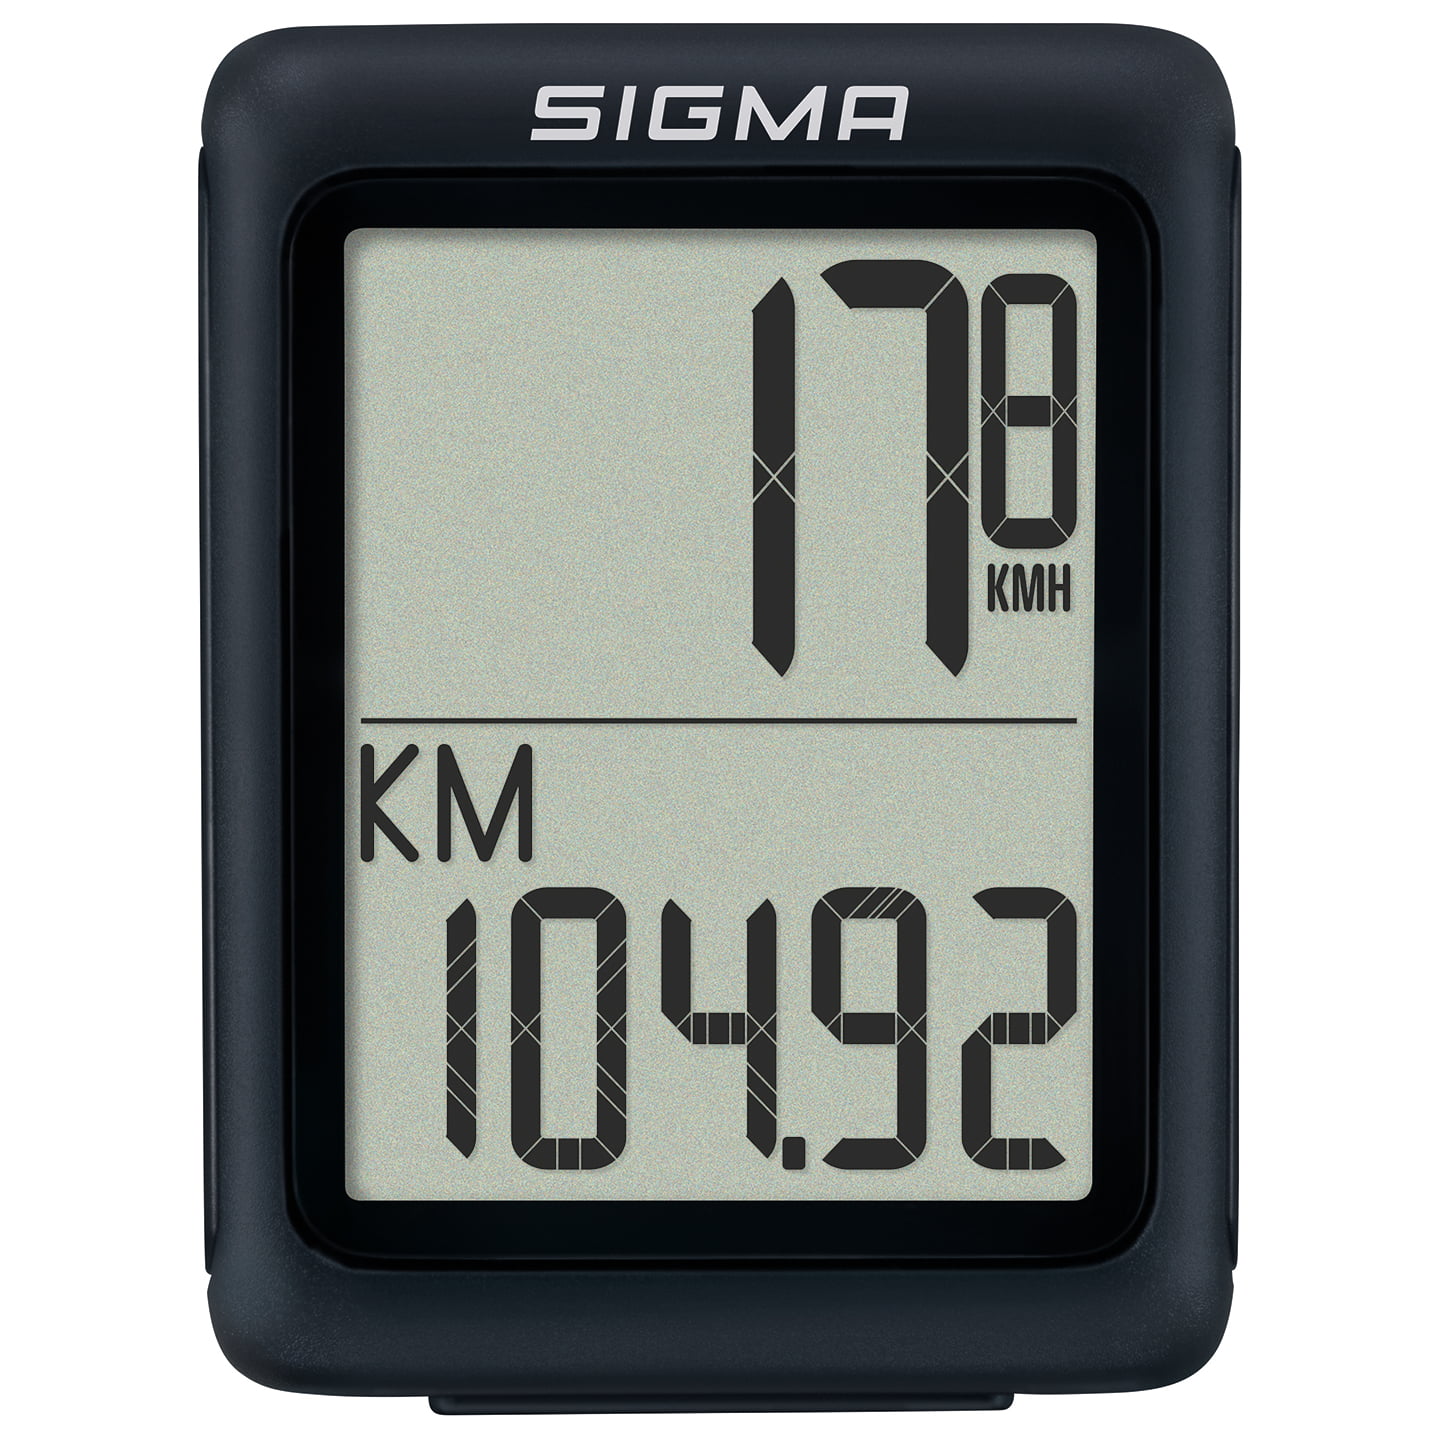 SIGMA BC 5.0 WR Cycling Computer Cycling Computer, Bike accessories